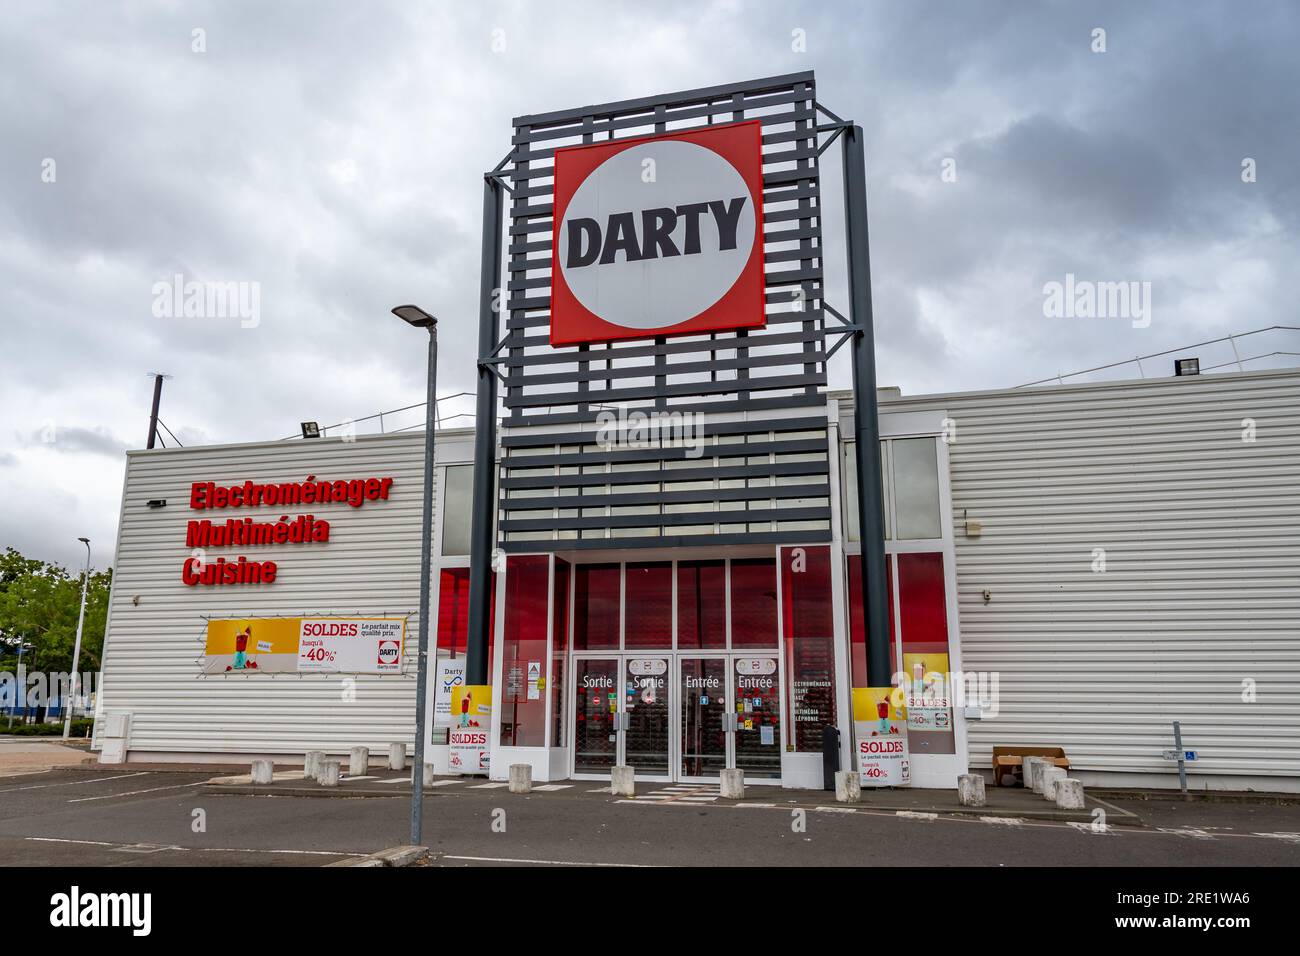 Exterior view of a Darty store, a French company specializing in retailing  household appliances, computer, communication and audiovisual equipment  Stock Photo - Alamy